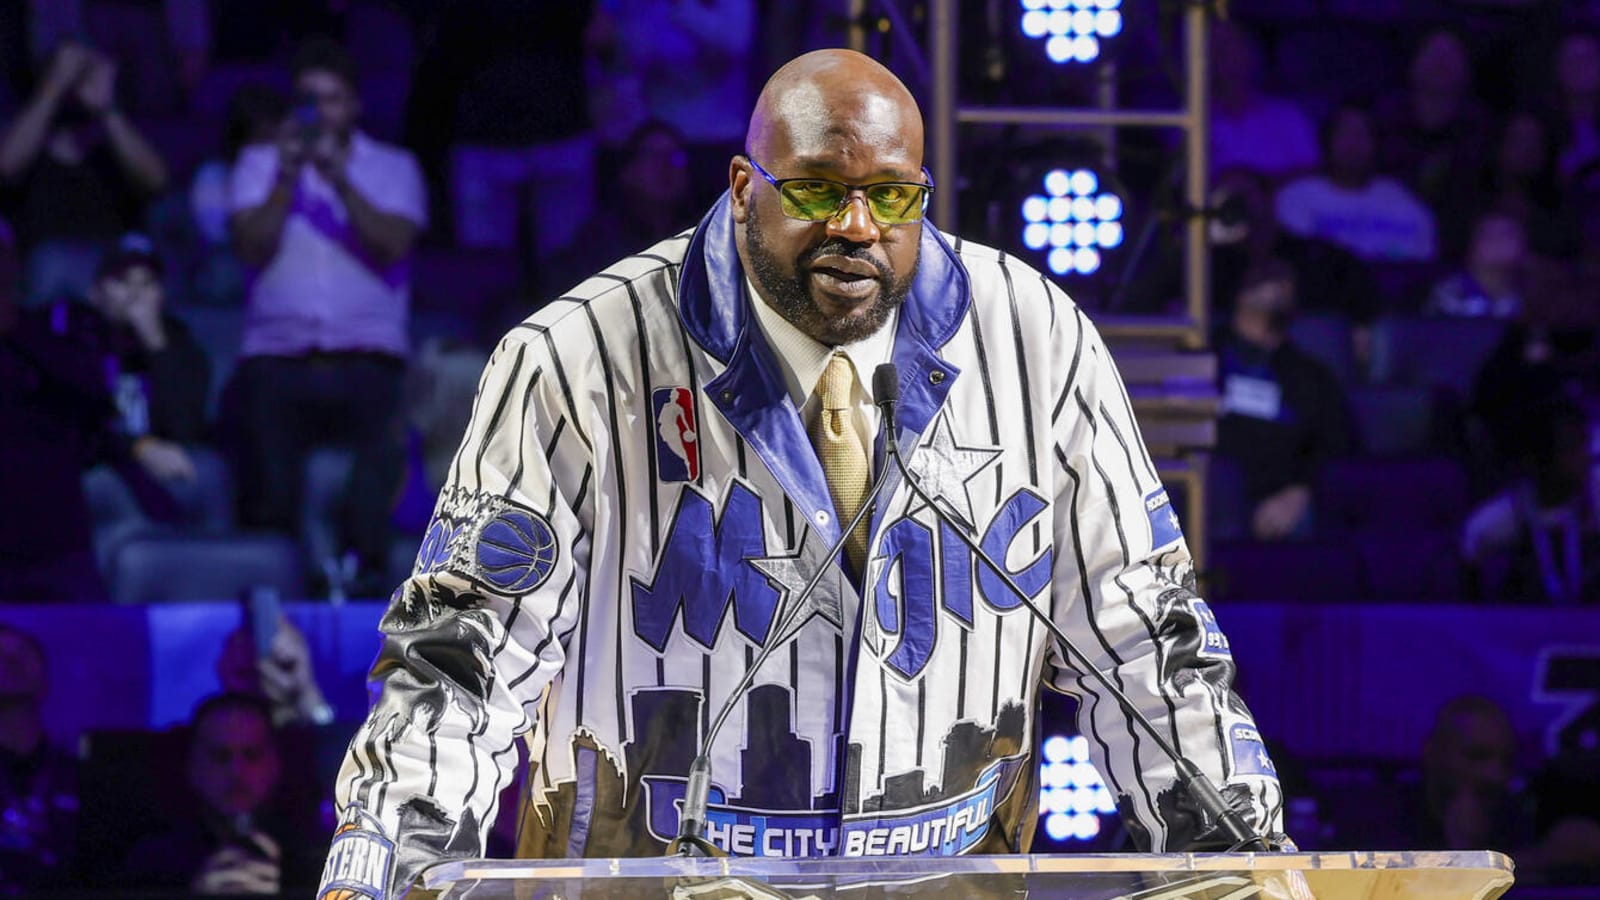 Could we see Shaq play in Ice Cube's 3-on-3 league?